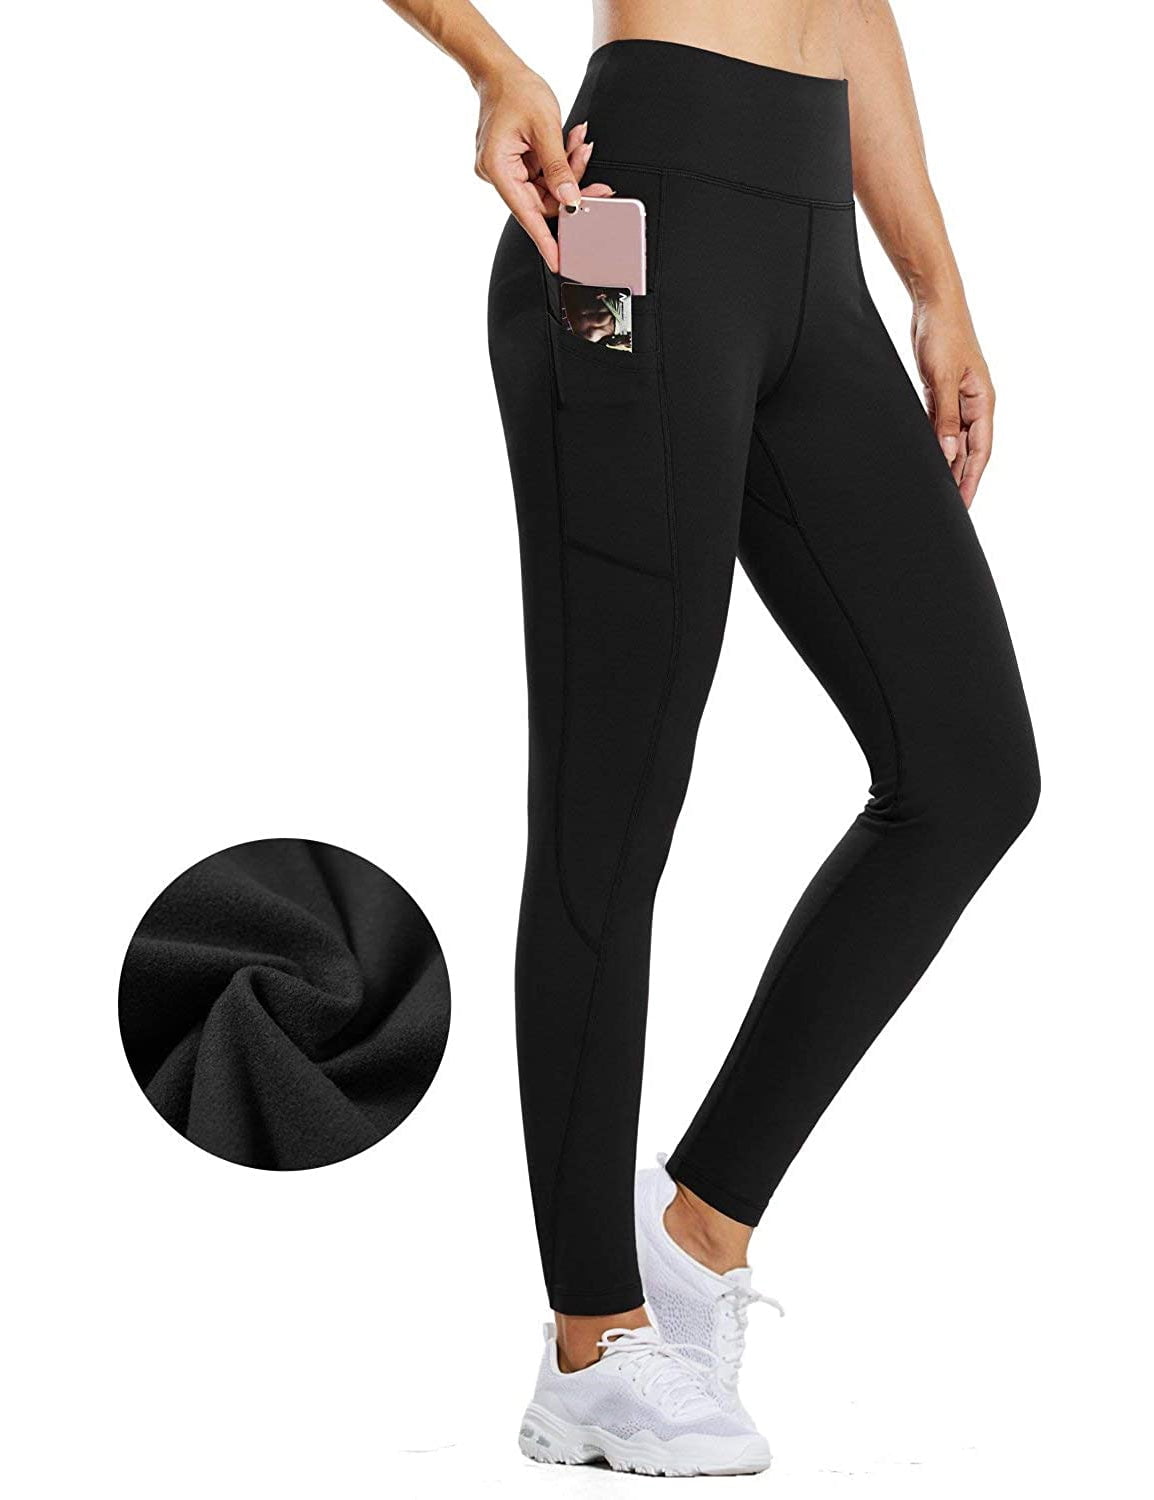 Buy Libin Women's Fleece Lined Leggings Water Resistant Winter Warm Thermal  Hiking Pants Running Workout Yoga Tights with Pockets, 01-black, Medium at